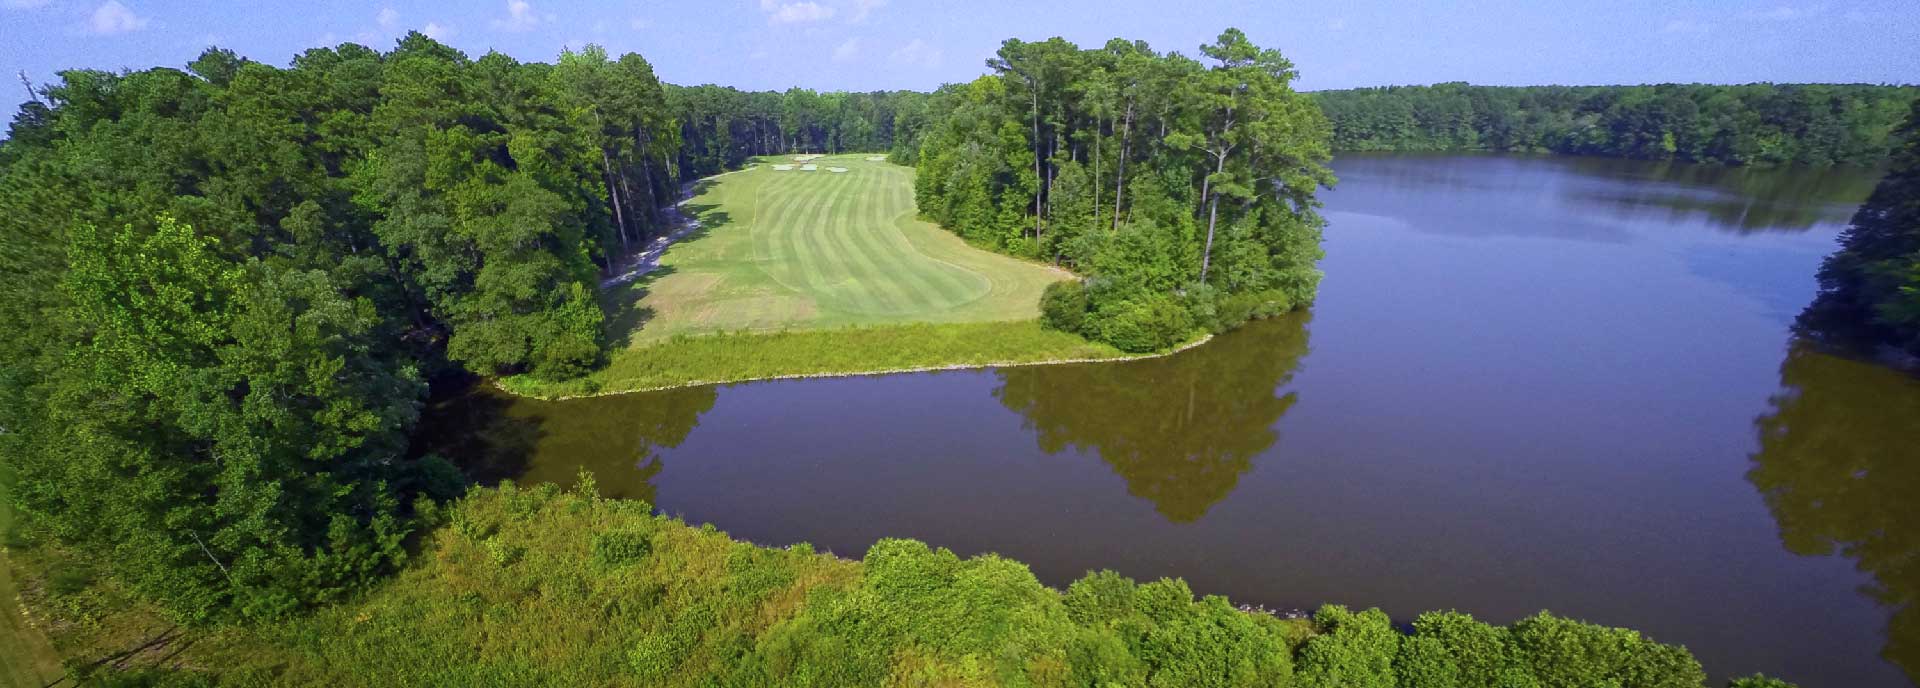 Pond of golf course with trees